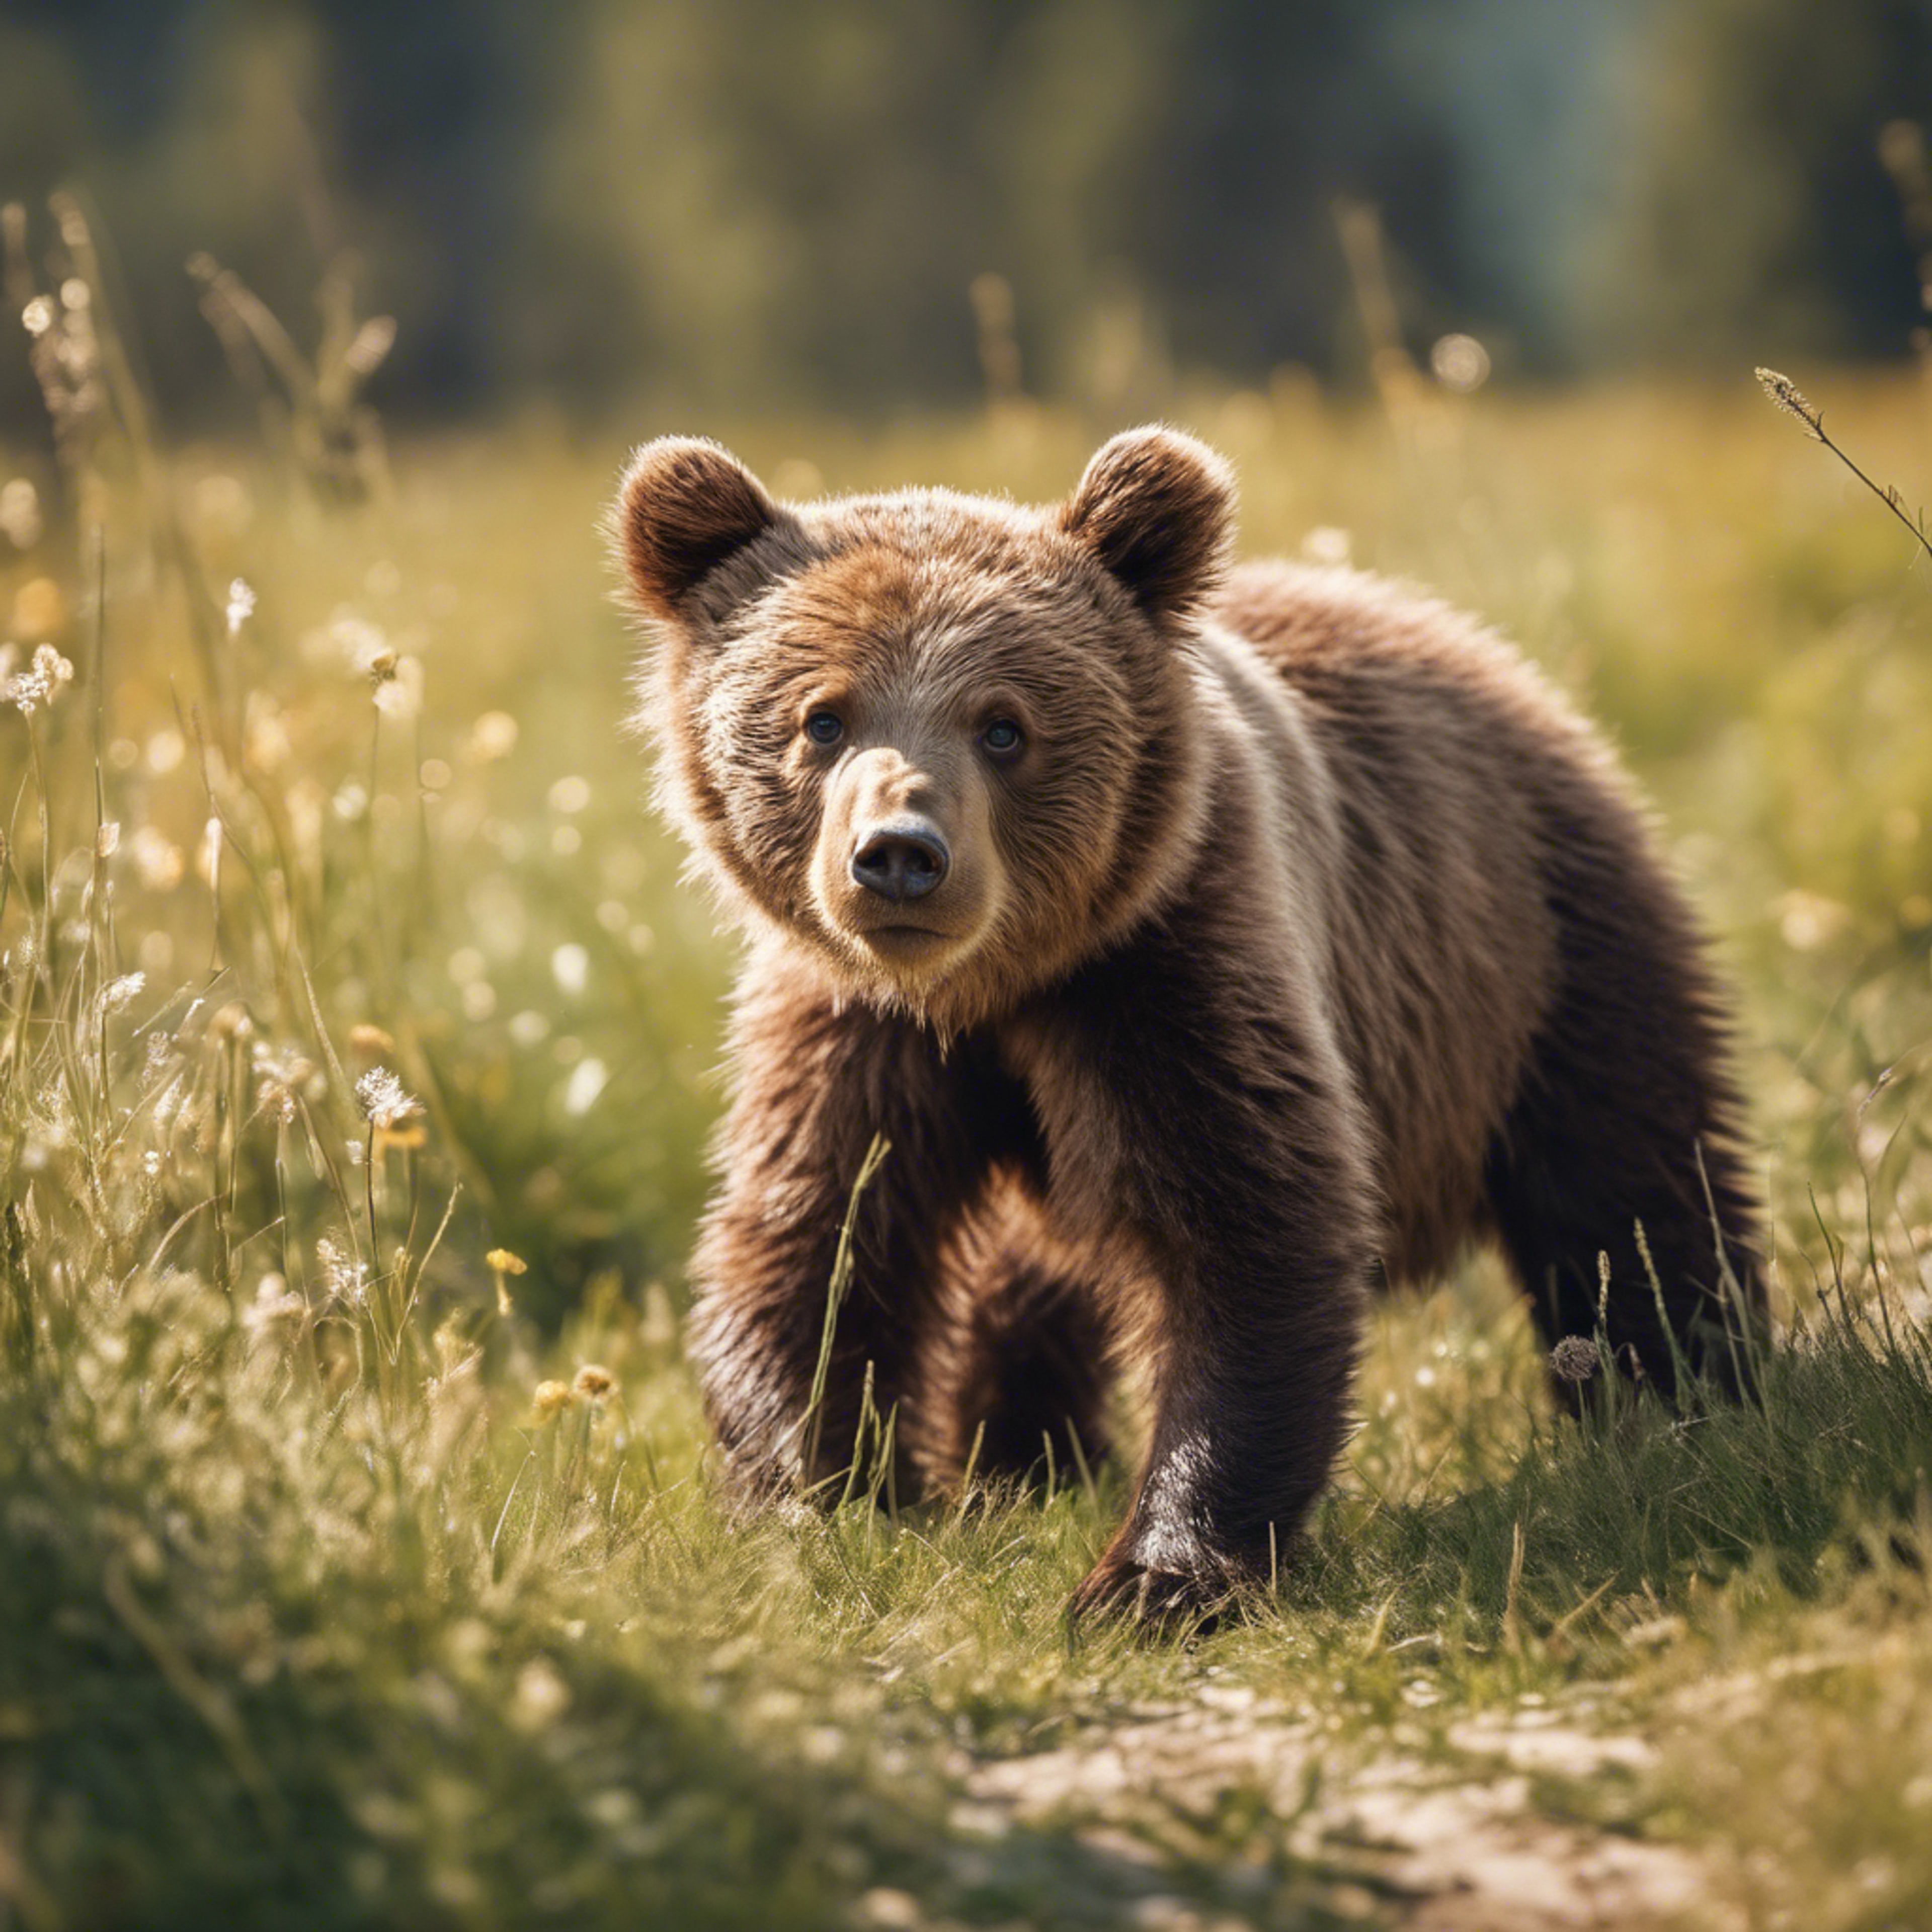 A baby brown bear playing in a sunny meadow 牆紙[71f2781006124793bc52]